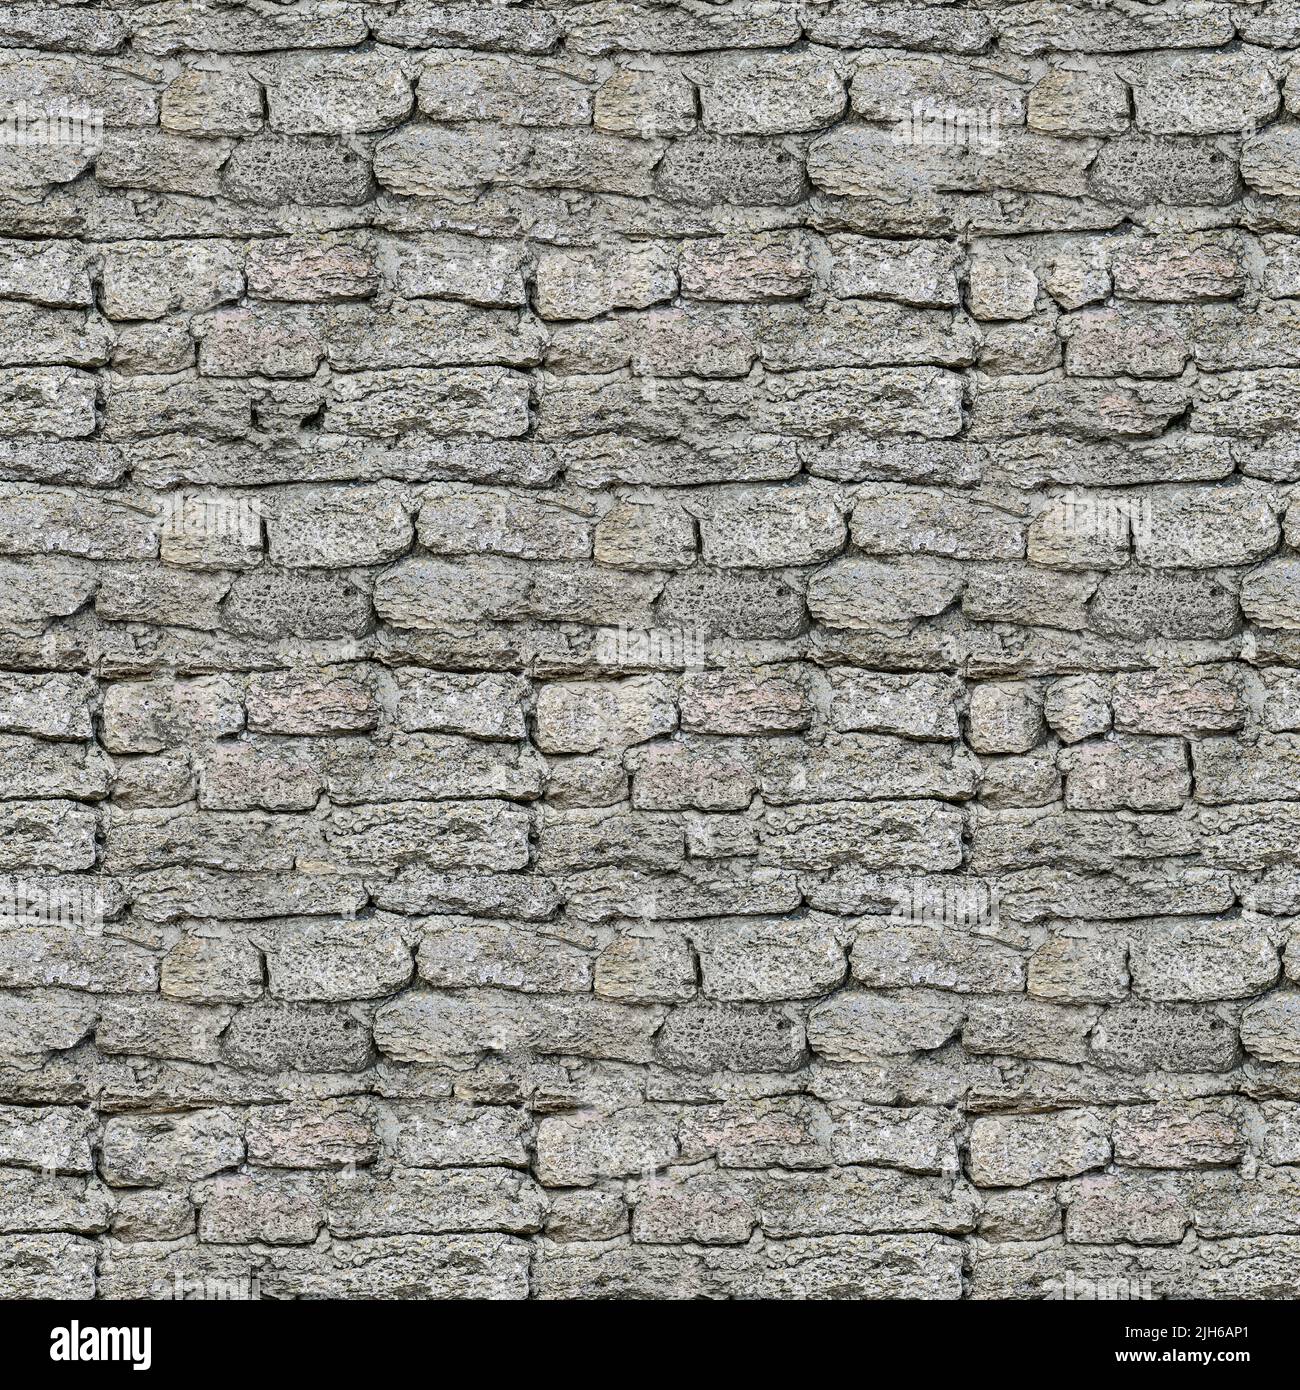 Large square brick wall seamless pattern. Endlessly repeating texture shell rock. Stock Photo